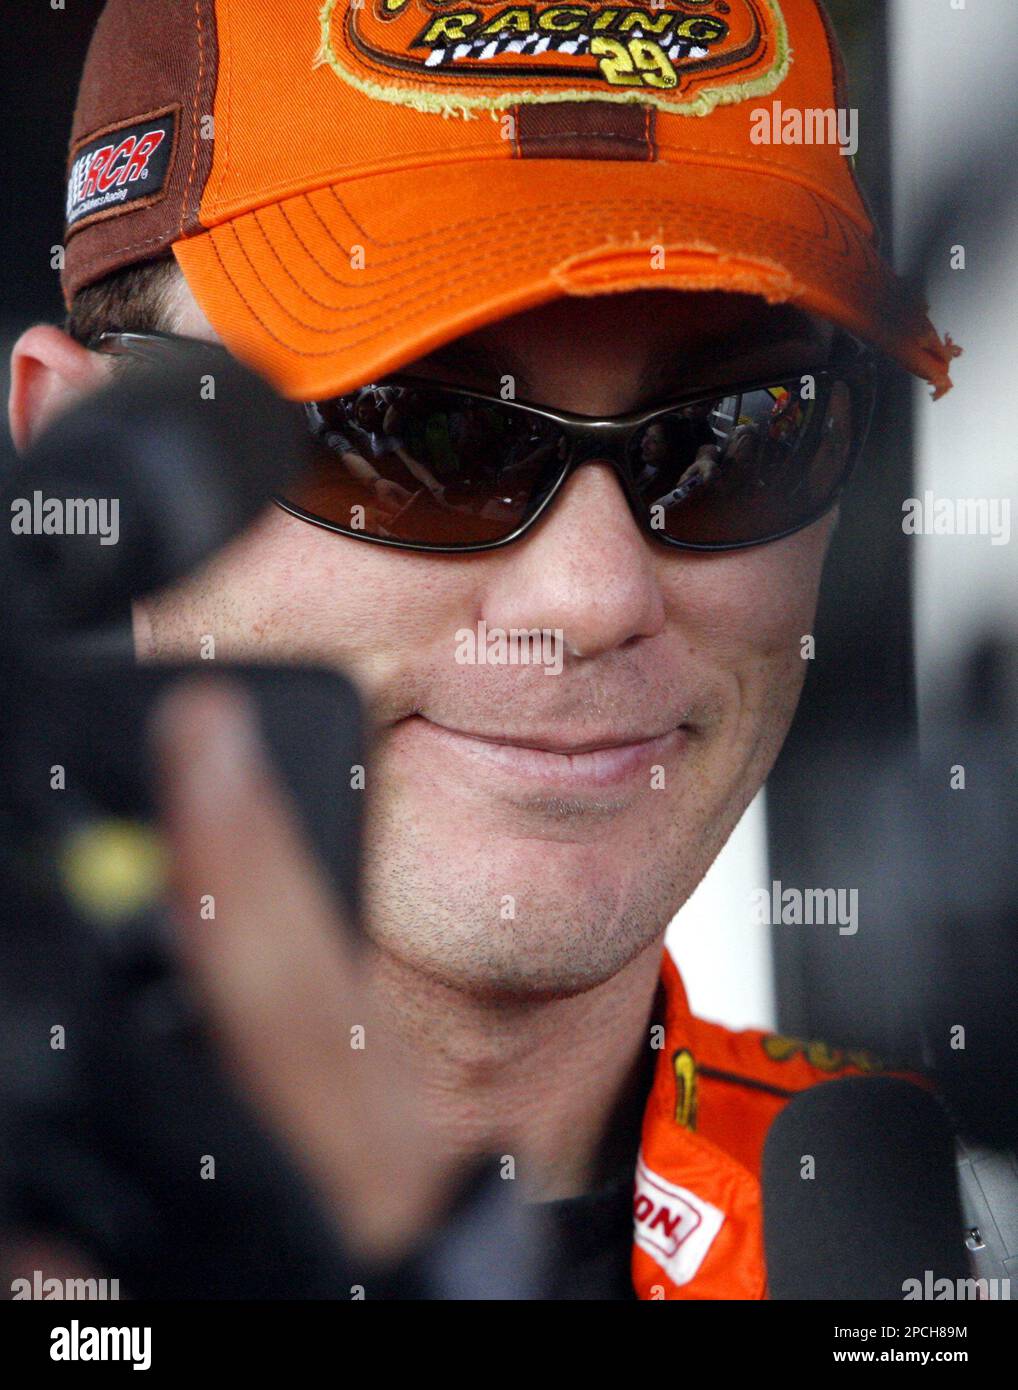 AUTO RACING PACKAGE FOR SEPT. 21 OR THEREAFTER ** NASCAR top ten driver  Kevin Harvick is seen at New Hampshire International Speedway in Loudon,  N.H. Friday Sept. 15, 2006. Harvick went